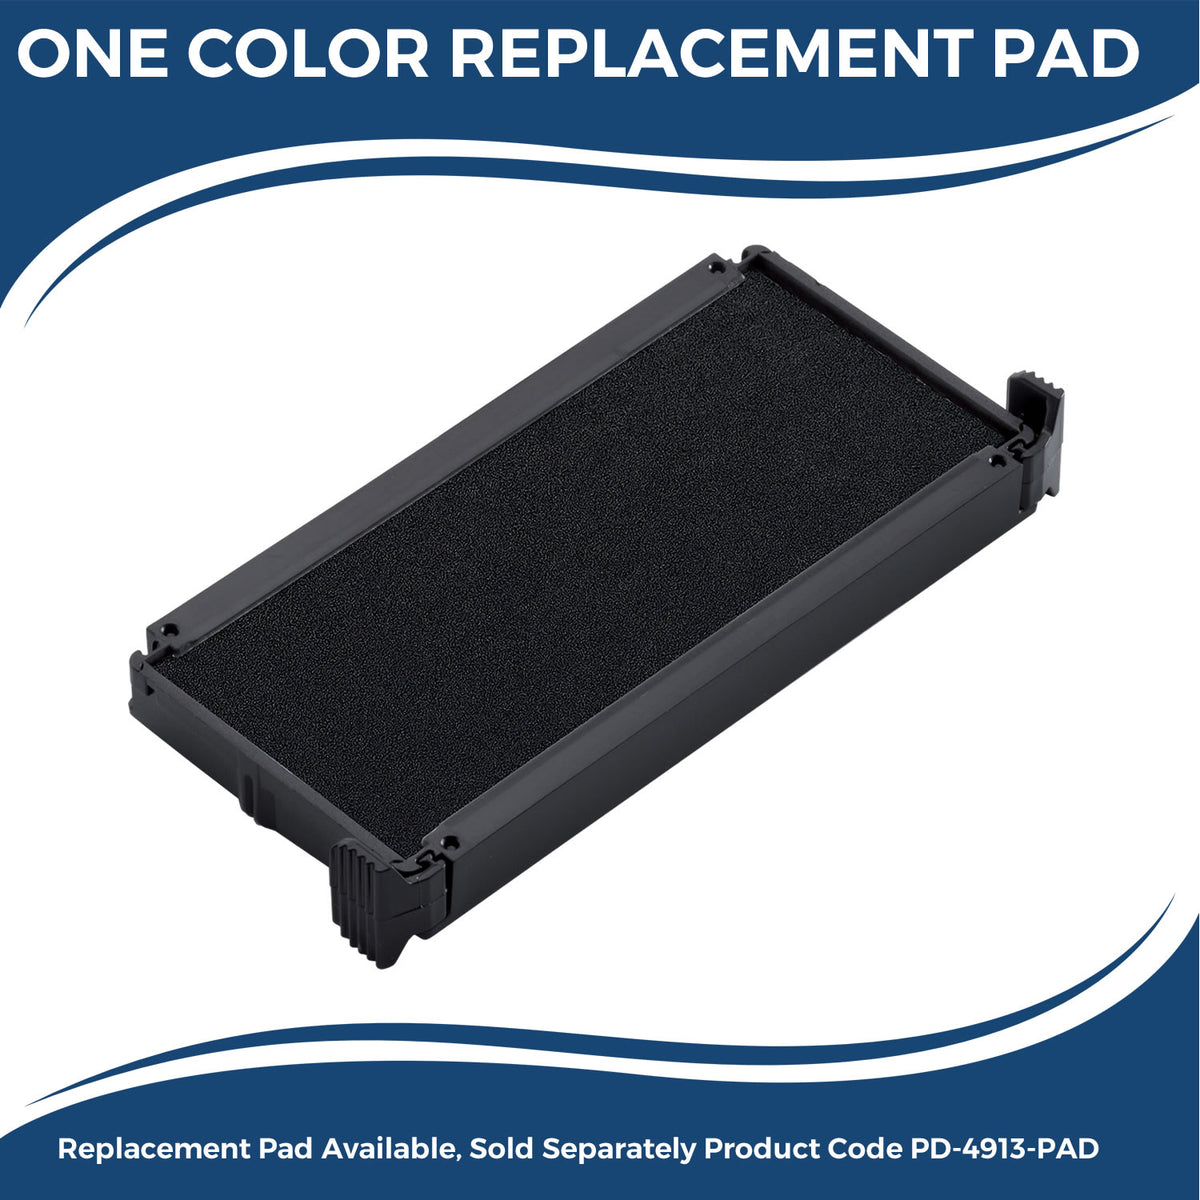 Large Self-Inking Copia Stamp 5524S Large Replacment Pad